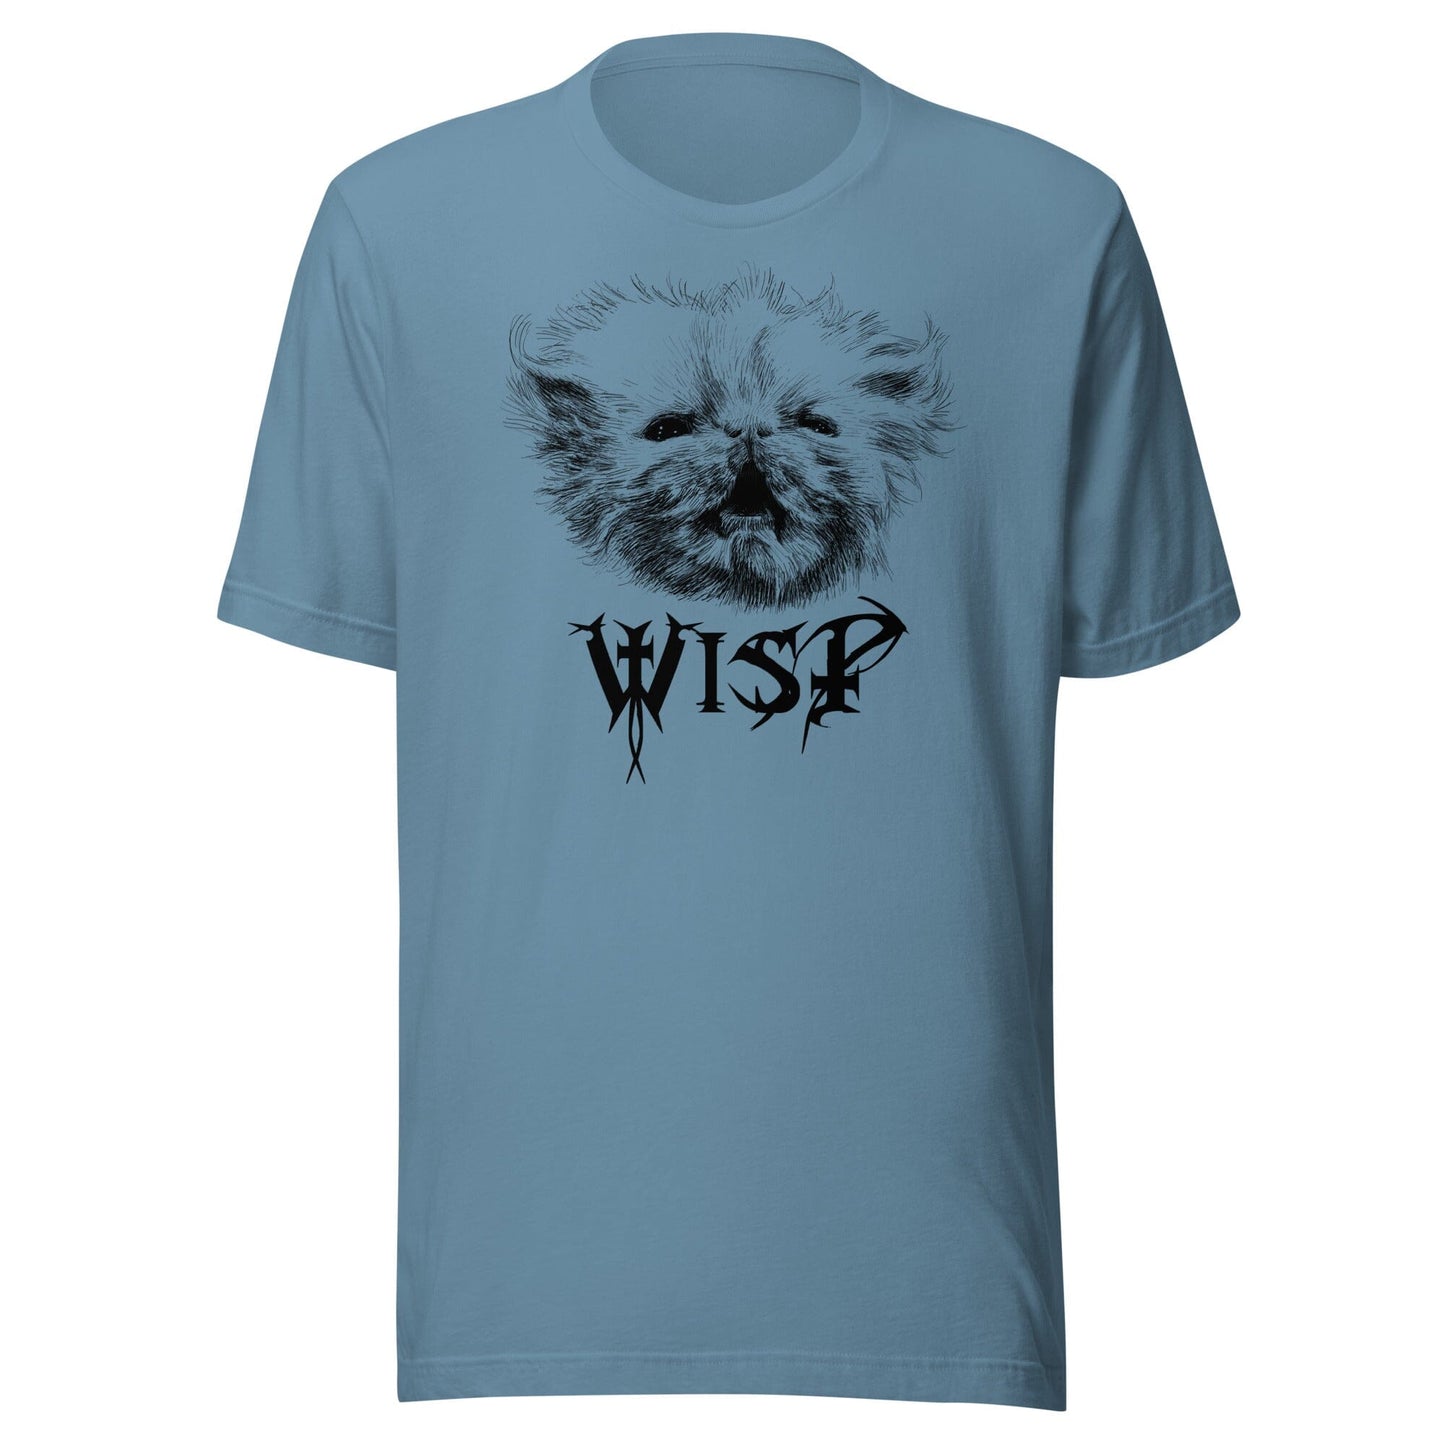 Metal Wisp T-Shirt [Unfoiled] (All net proceeds go to Rags to Riches Animal Rescue) JoyousJoyfulJoyness Steel Blue S 